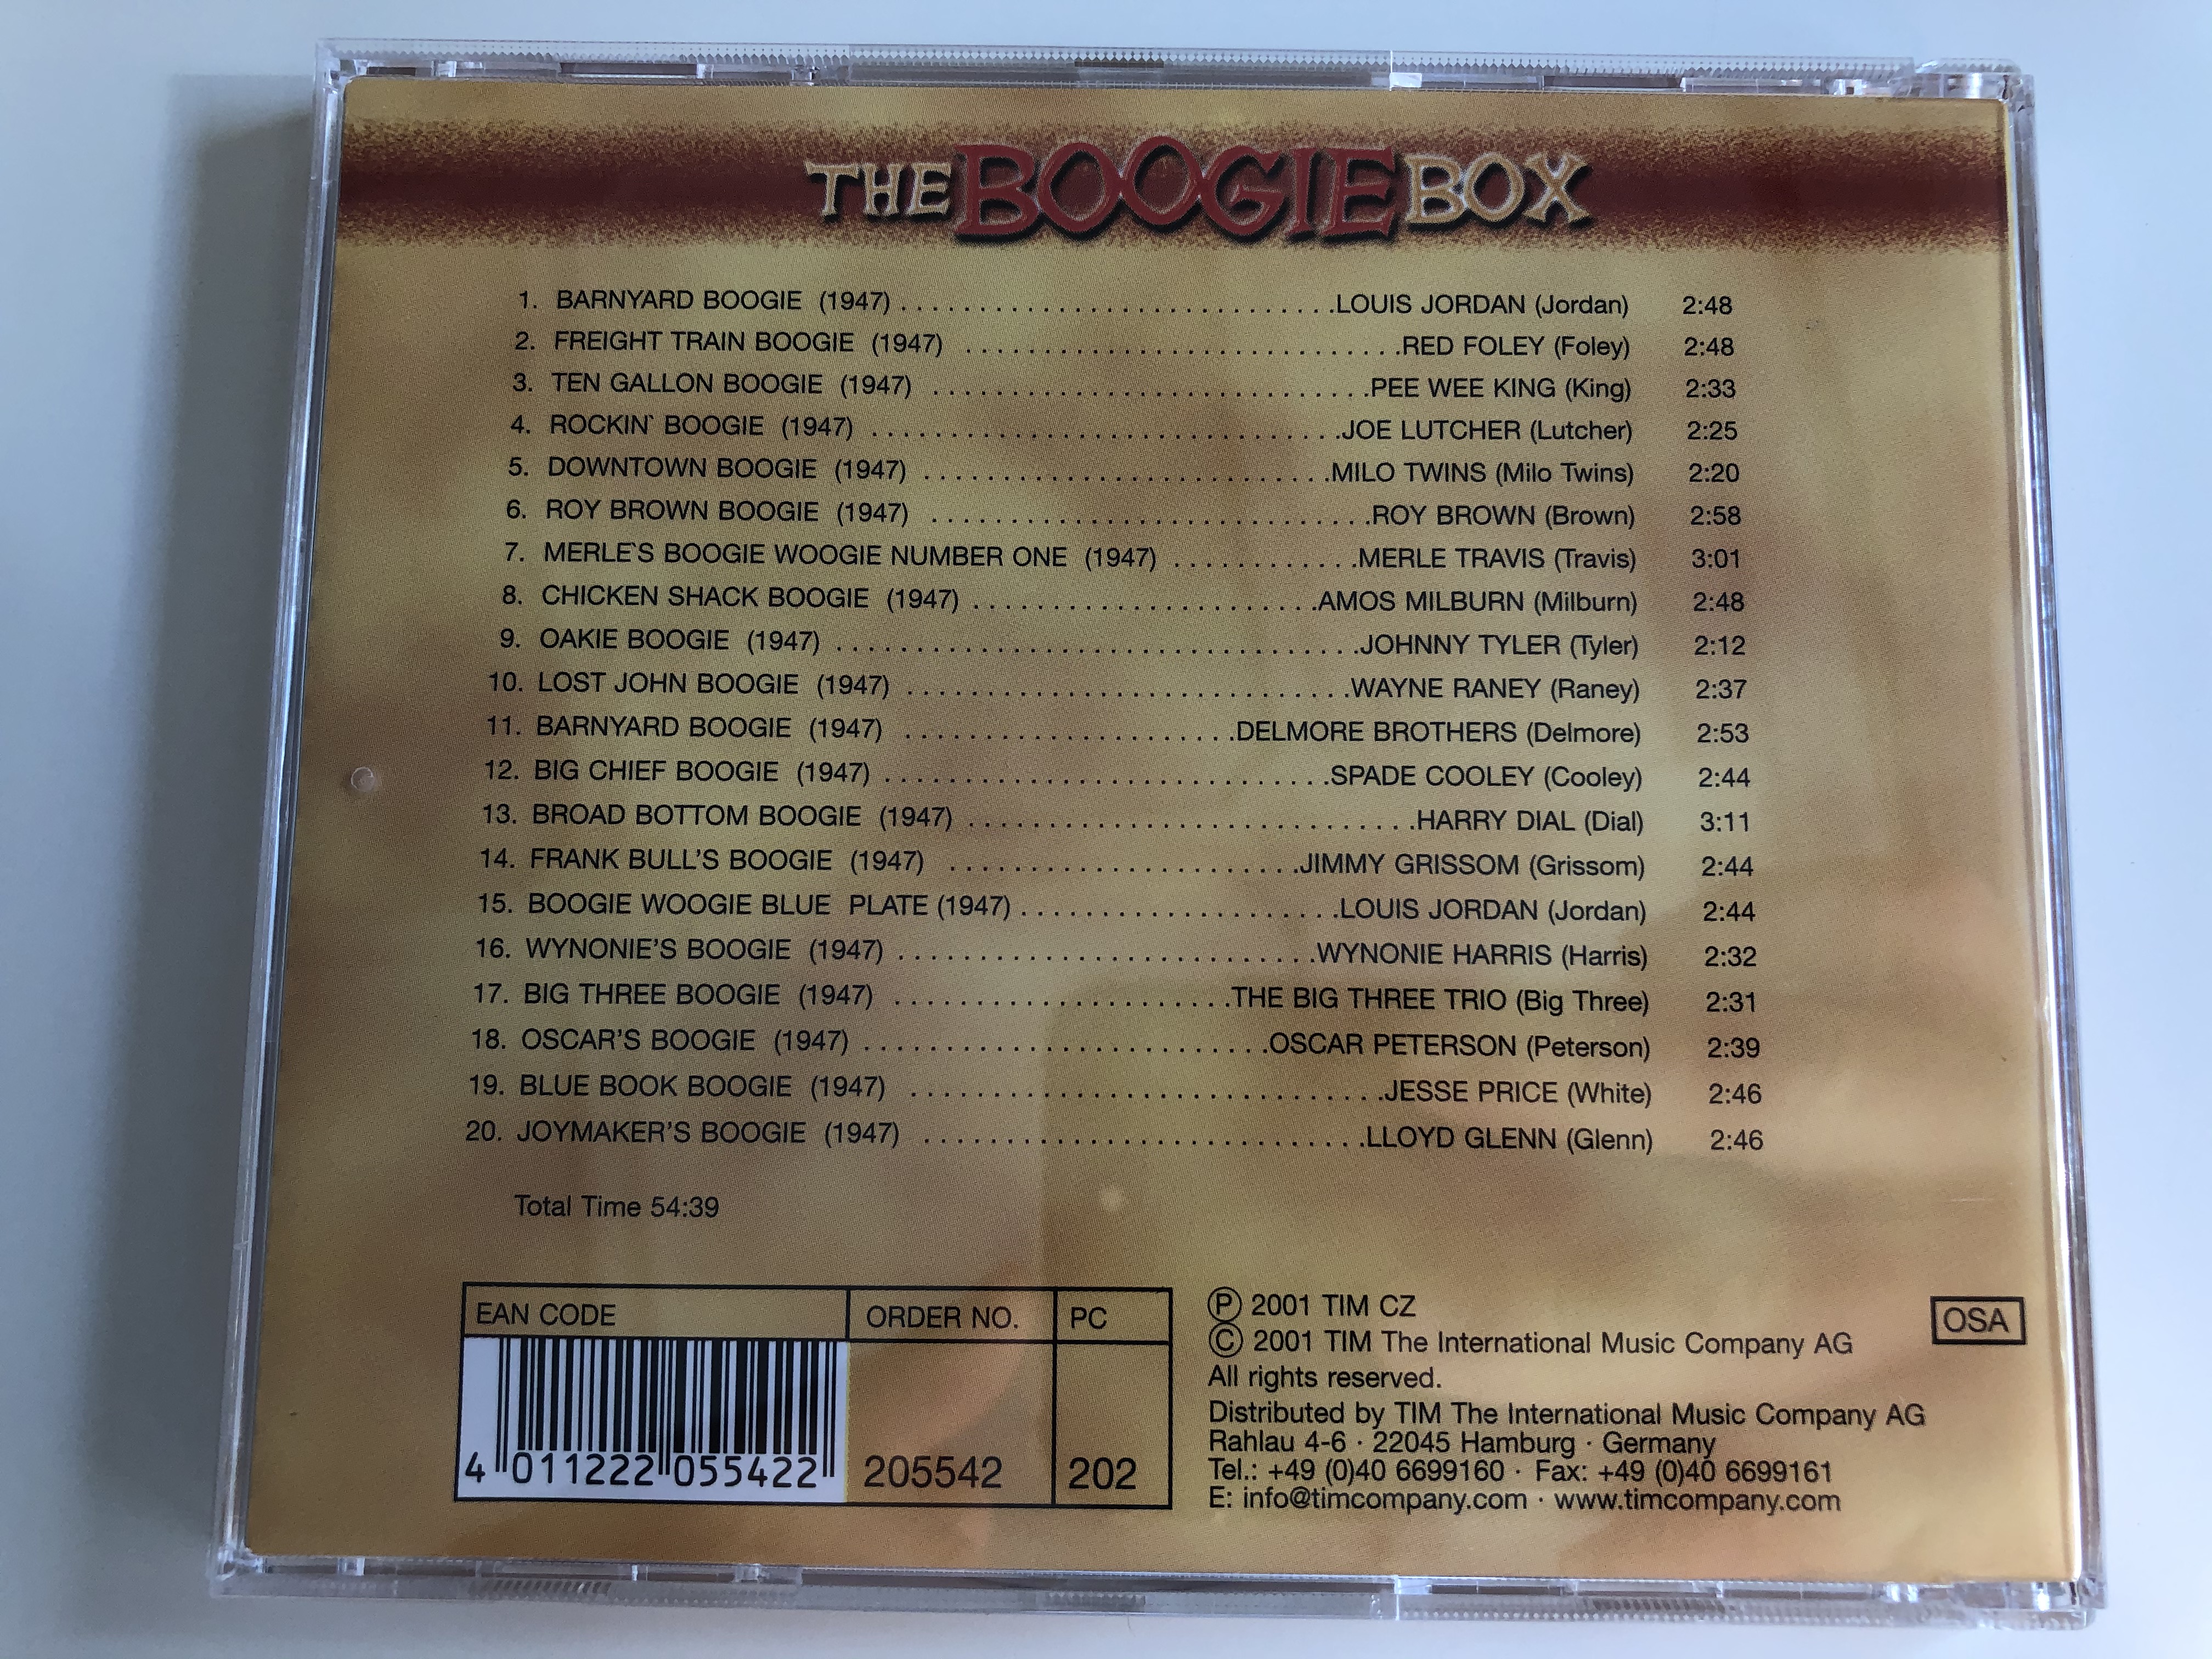 the-boogie-box-vol.-7-red-foley-pee-wee-king-joe-lutcher-milo-twins-roy-brown-johnny-tyler-wayne-raney-spade-cooley-harry-dial-jimmie-grissom-oscar-peterson-jesse-price-and-many-others-tim-cz-au.jpg